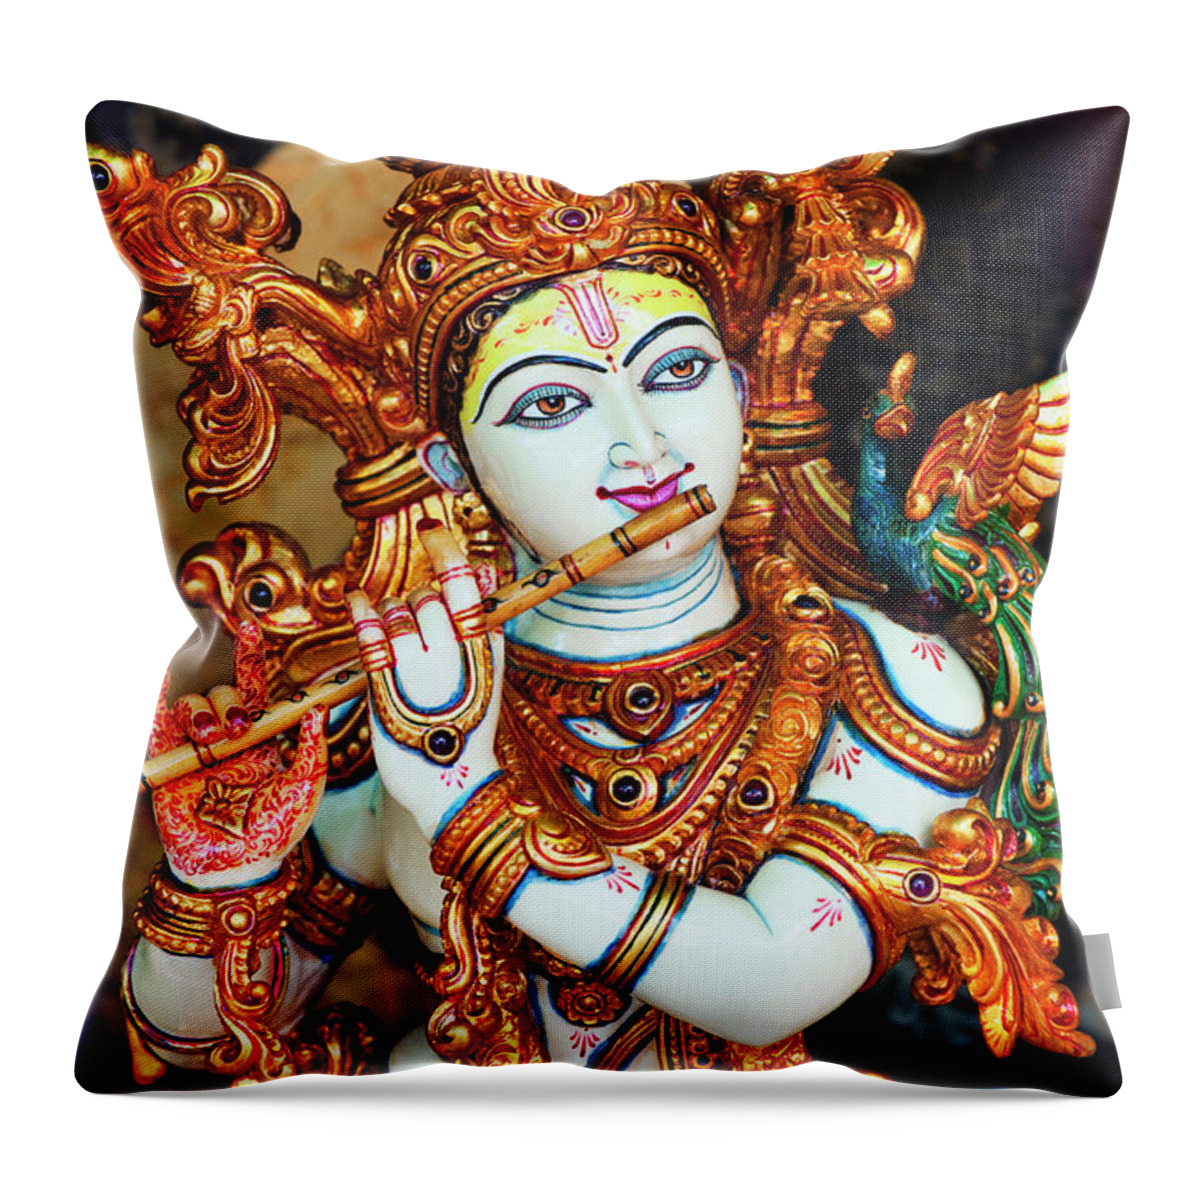 Lord Throw Pillow featuring the photograph Ornate Krishna by Tim Gainey